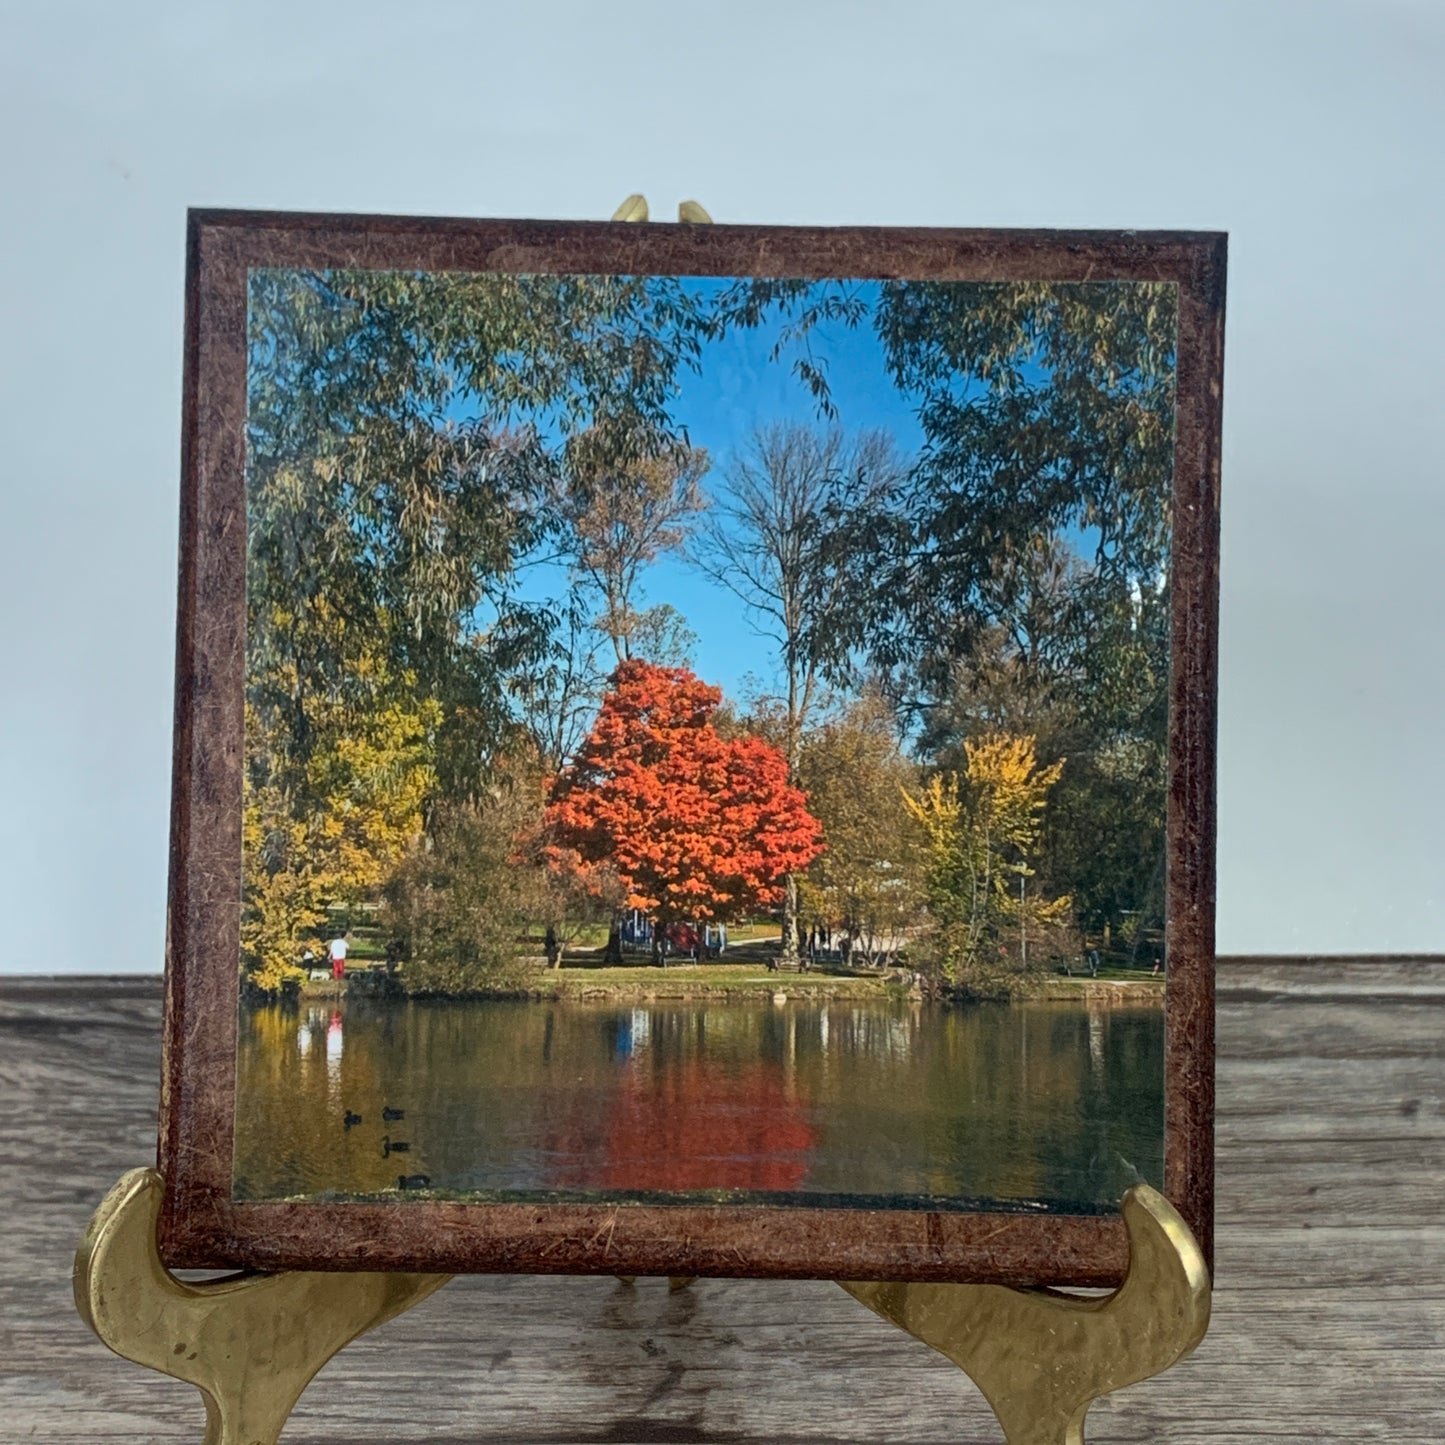 Set of 4 Cork Backed Coasters with Autumn Landscape Scenes